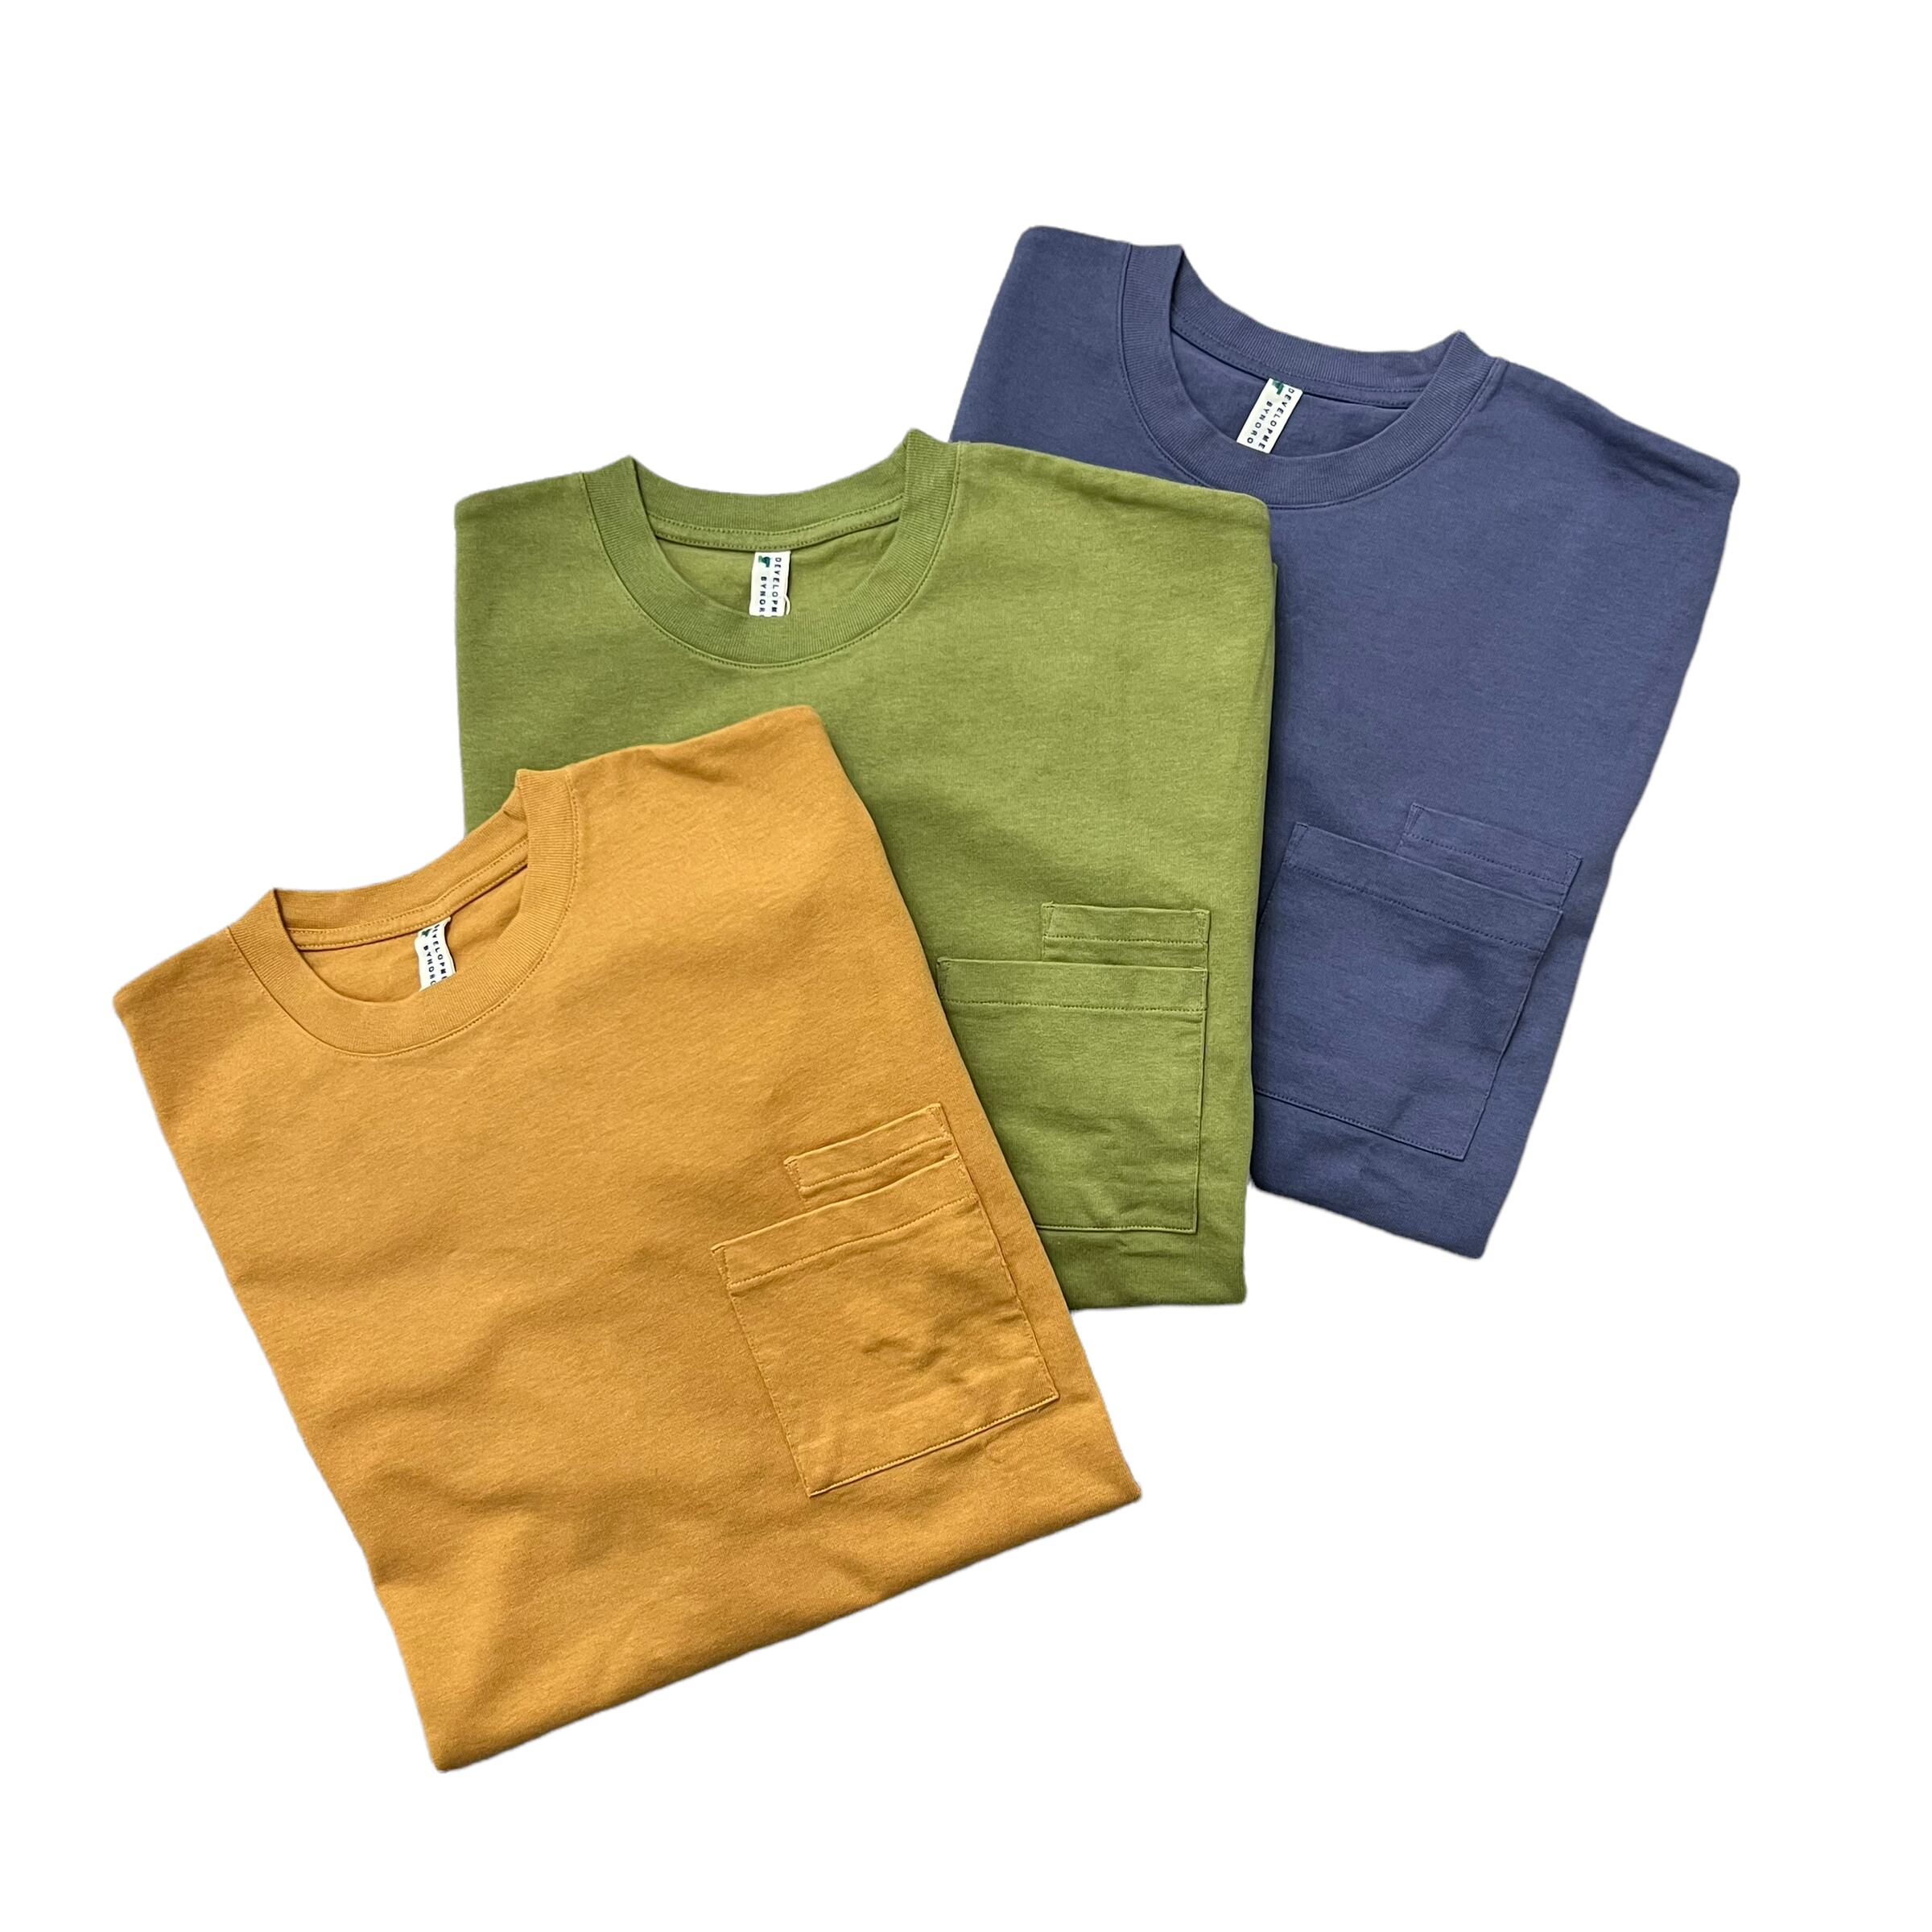 NOROLL / CARDPOCKET TEE L/S GREEN | THE NEWAGE CLUB powered by BASE